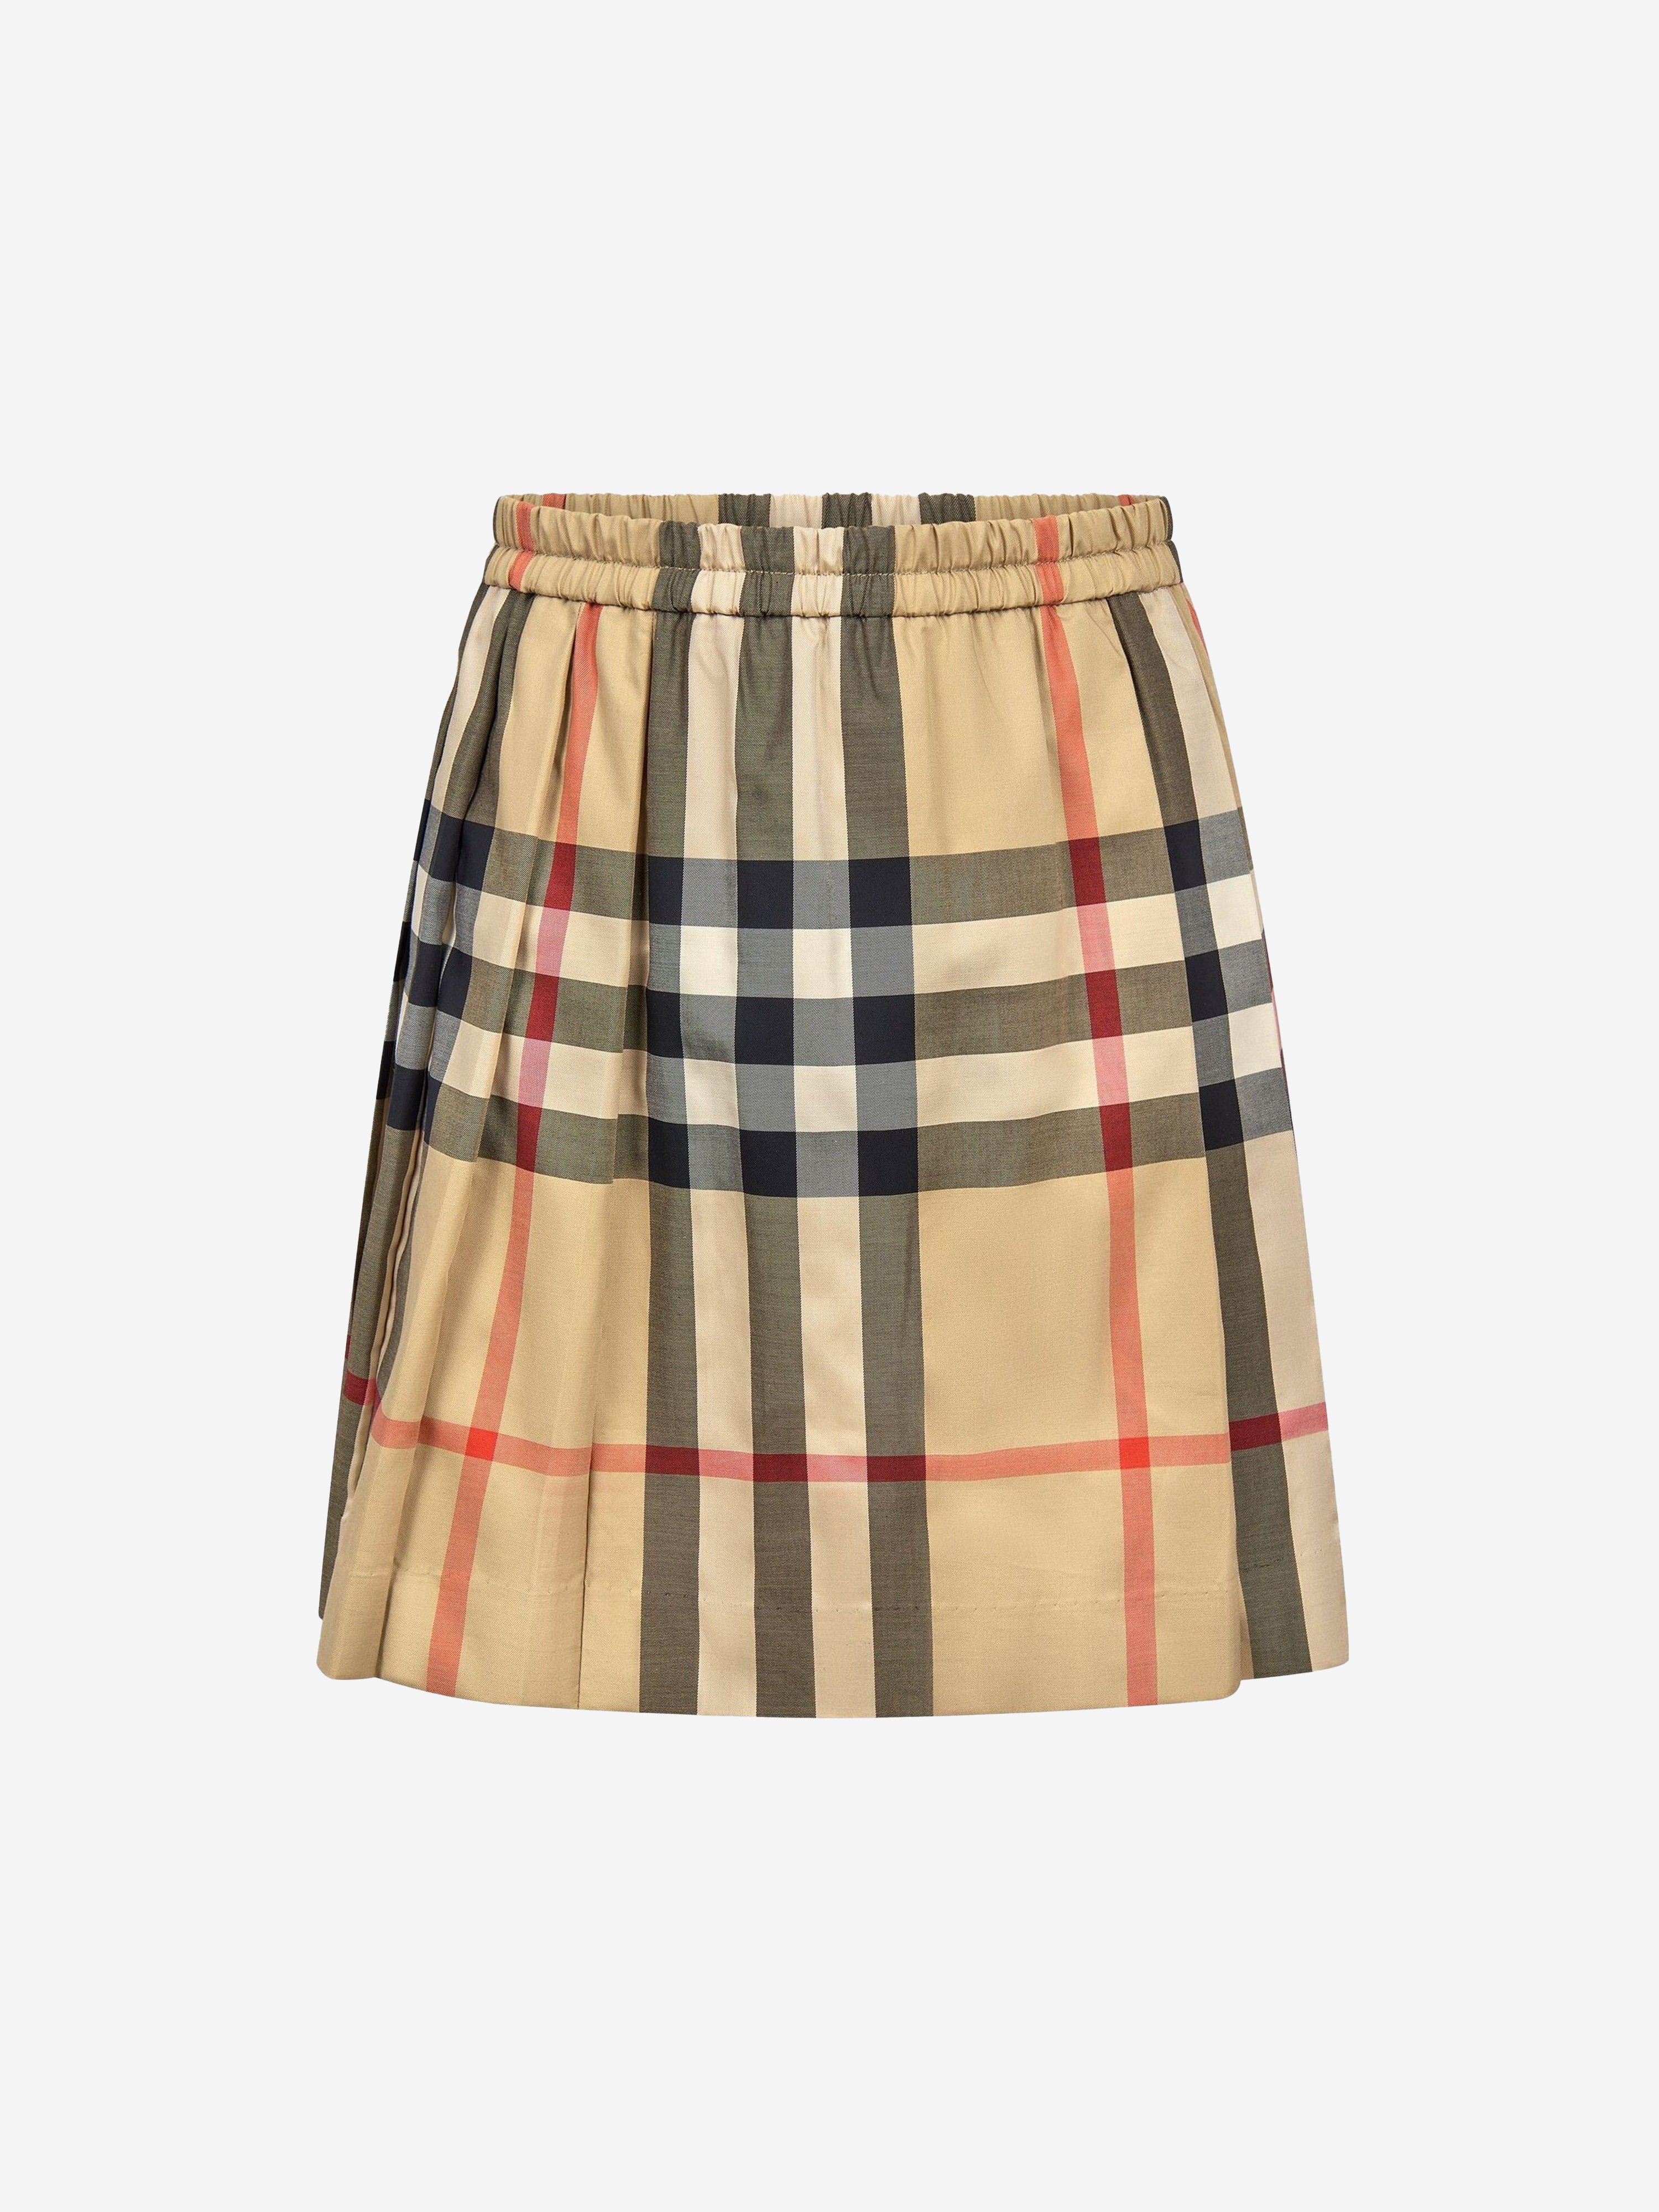 Burberry Babies' Girls Check Cotton Skirt 4 Yrs Beige In Brown